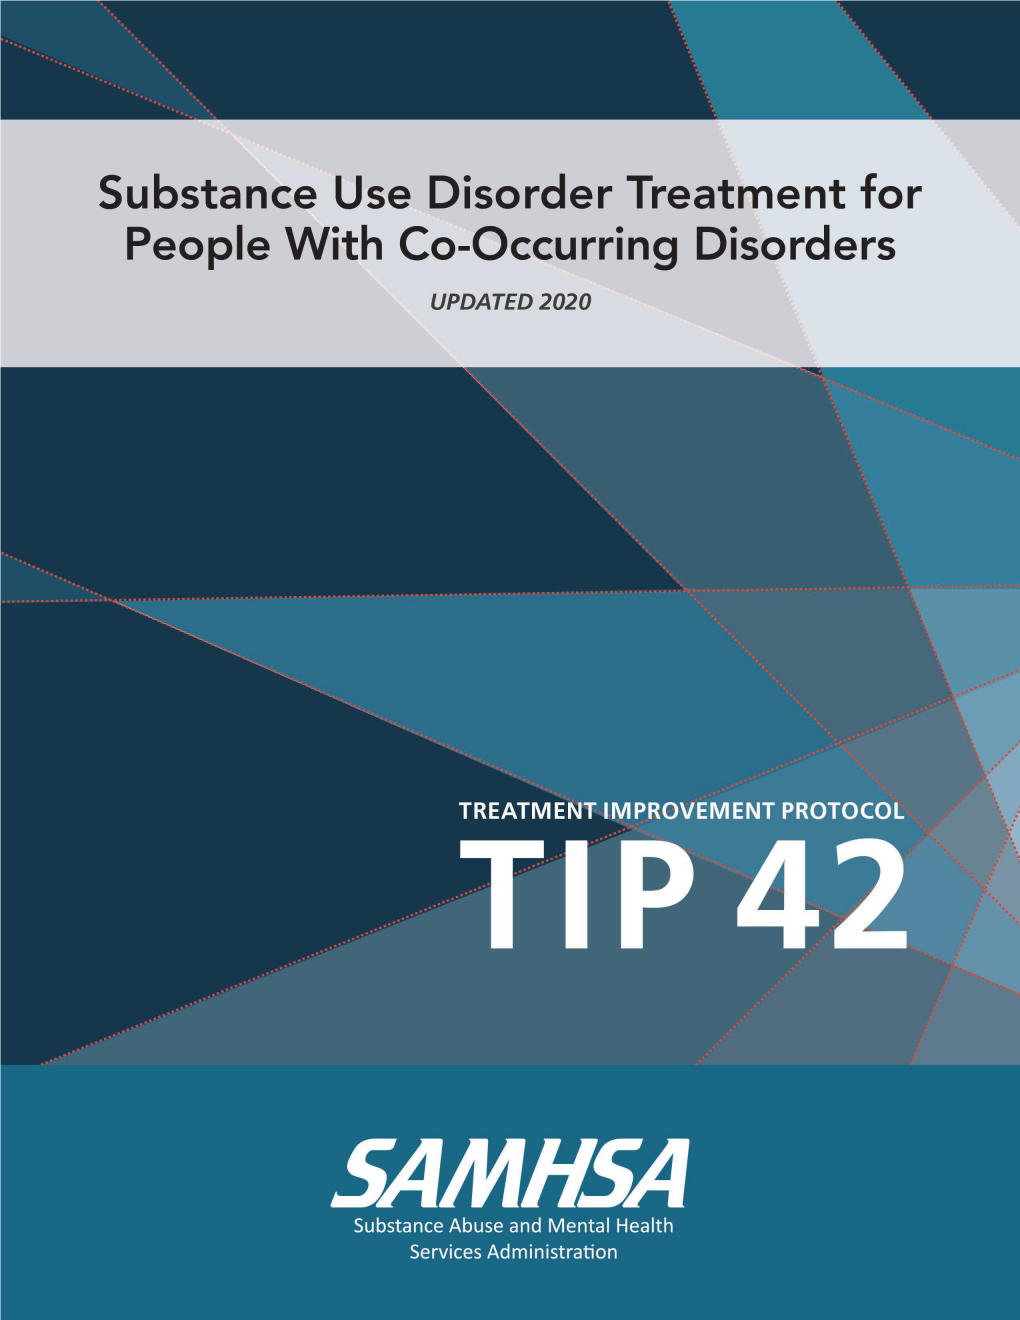 Substance Use Disorder Treatment for People with Co-Occurring Disorders MARCH 2020